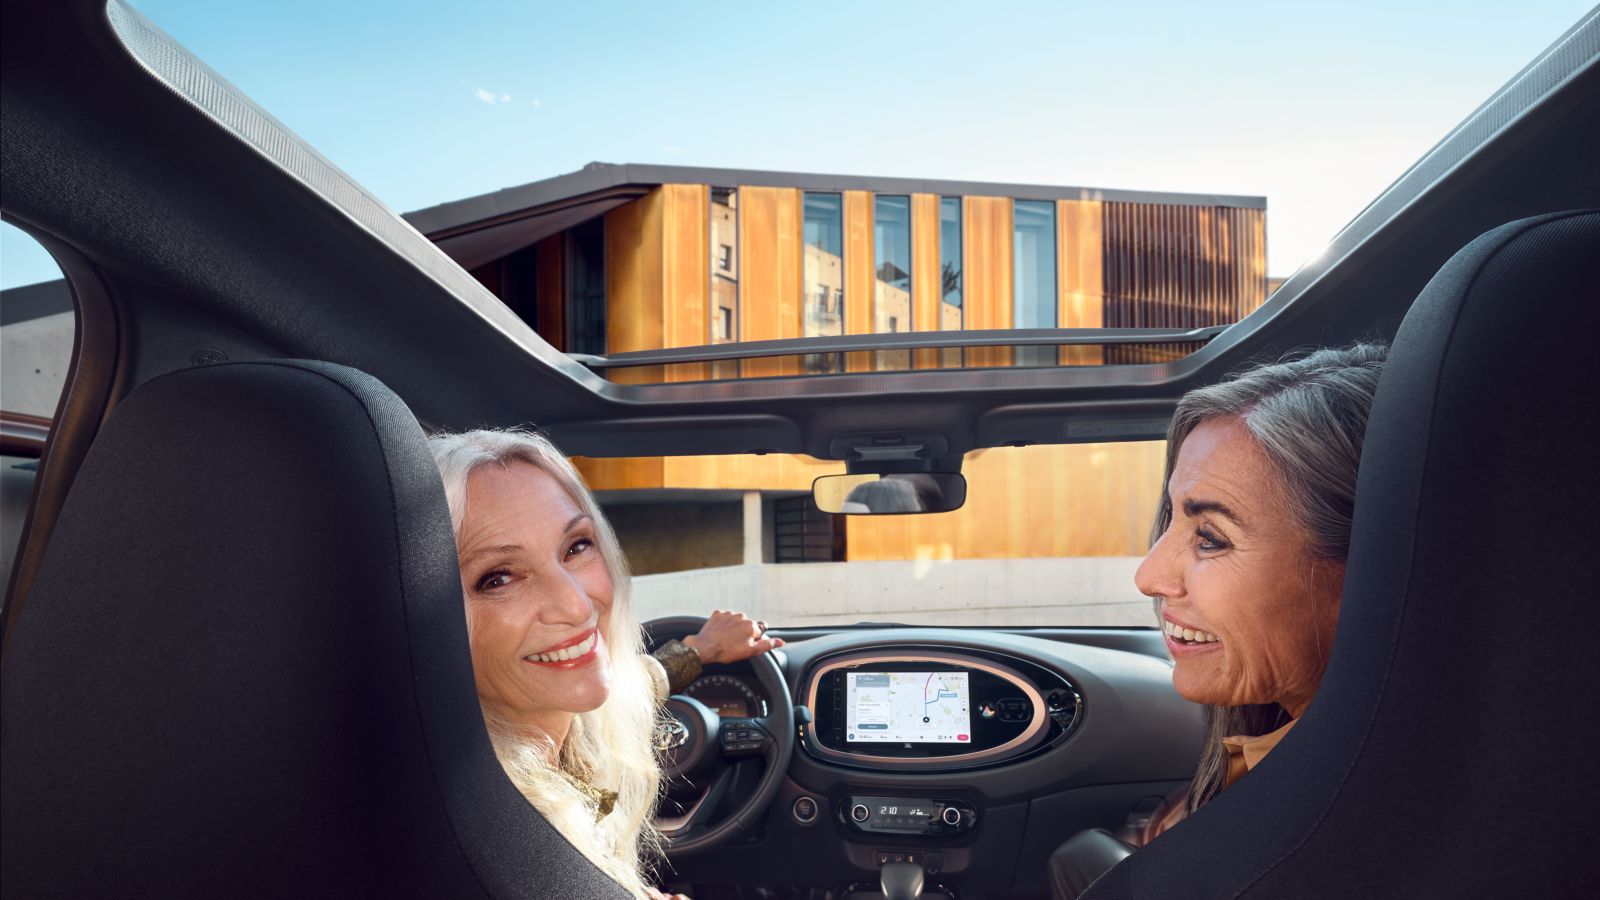 Aygo X is designed with a wealth of human touches built to prompt easy interaction between driver and passengers.